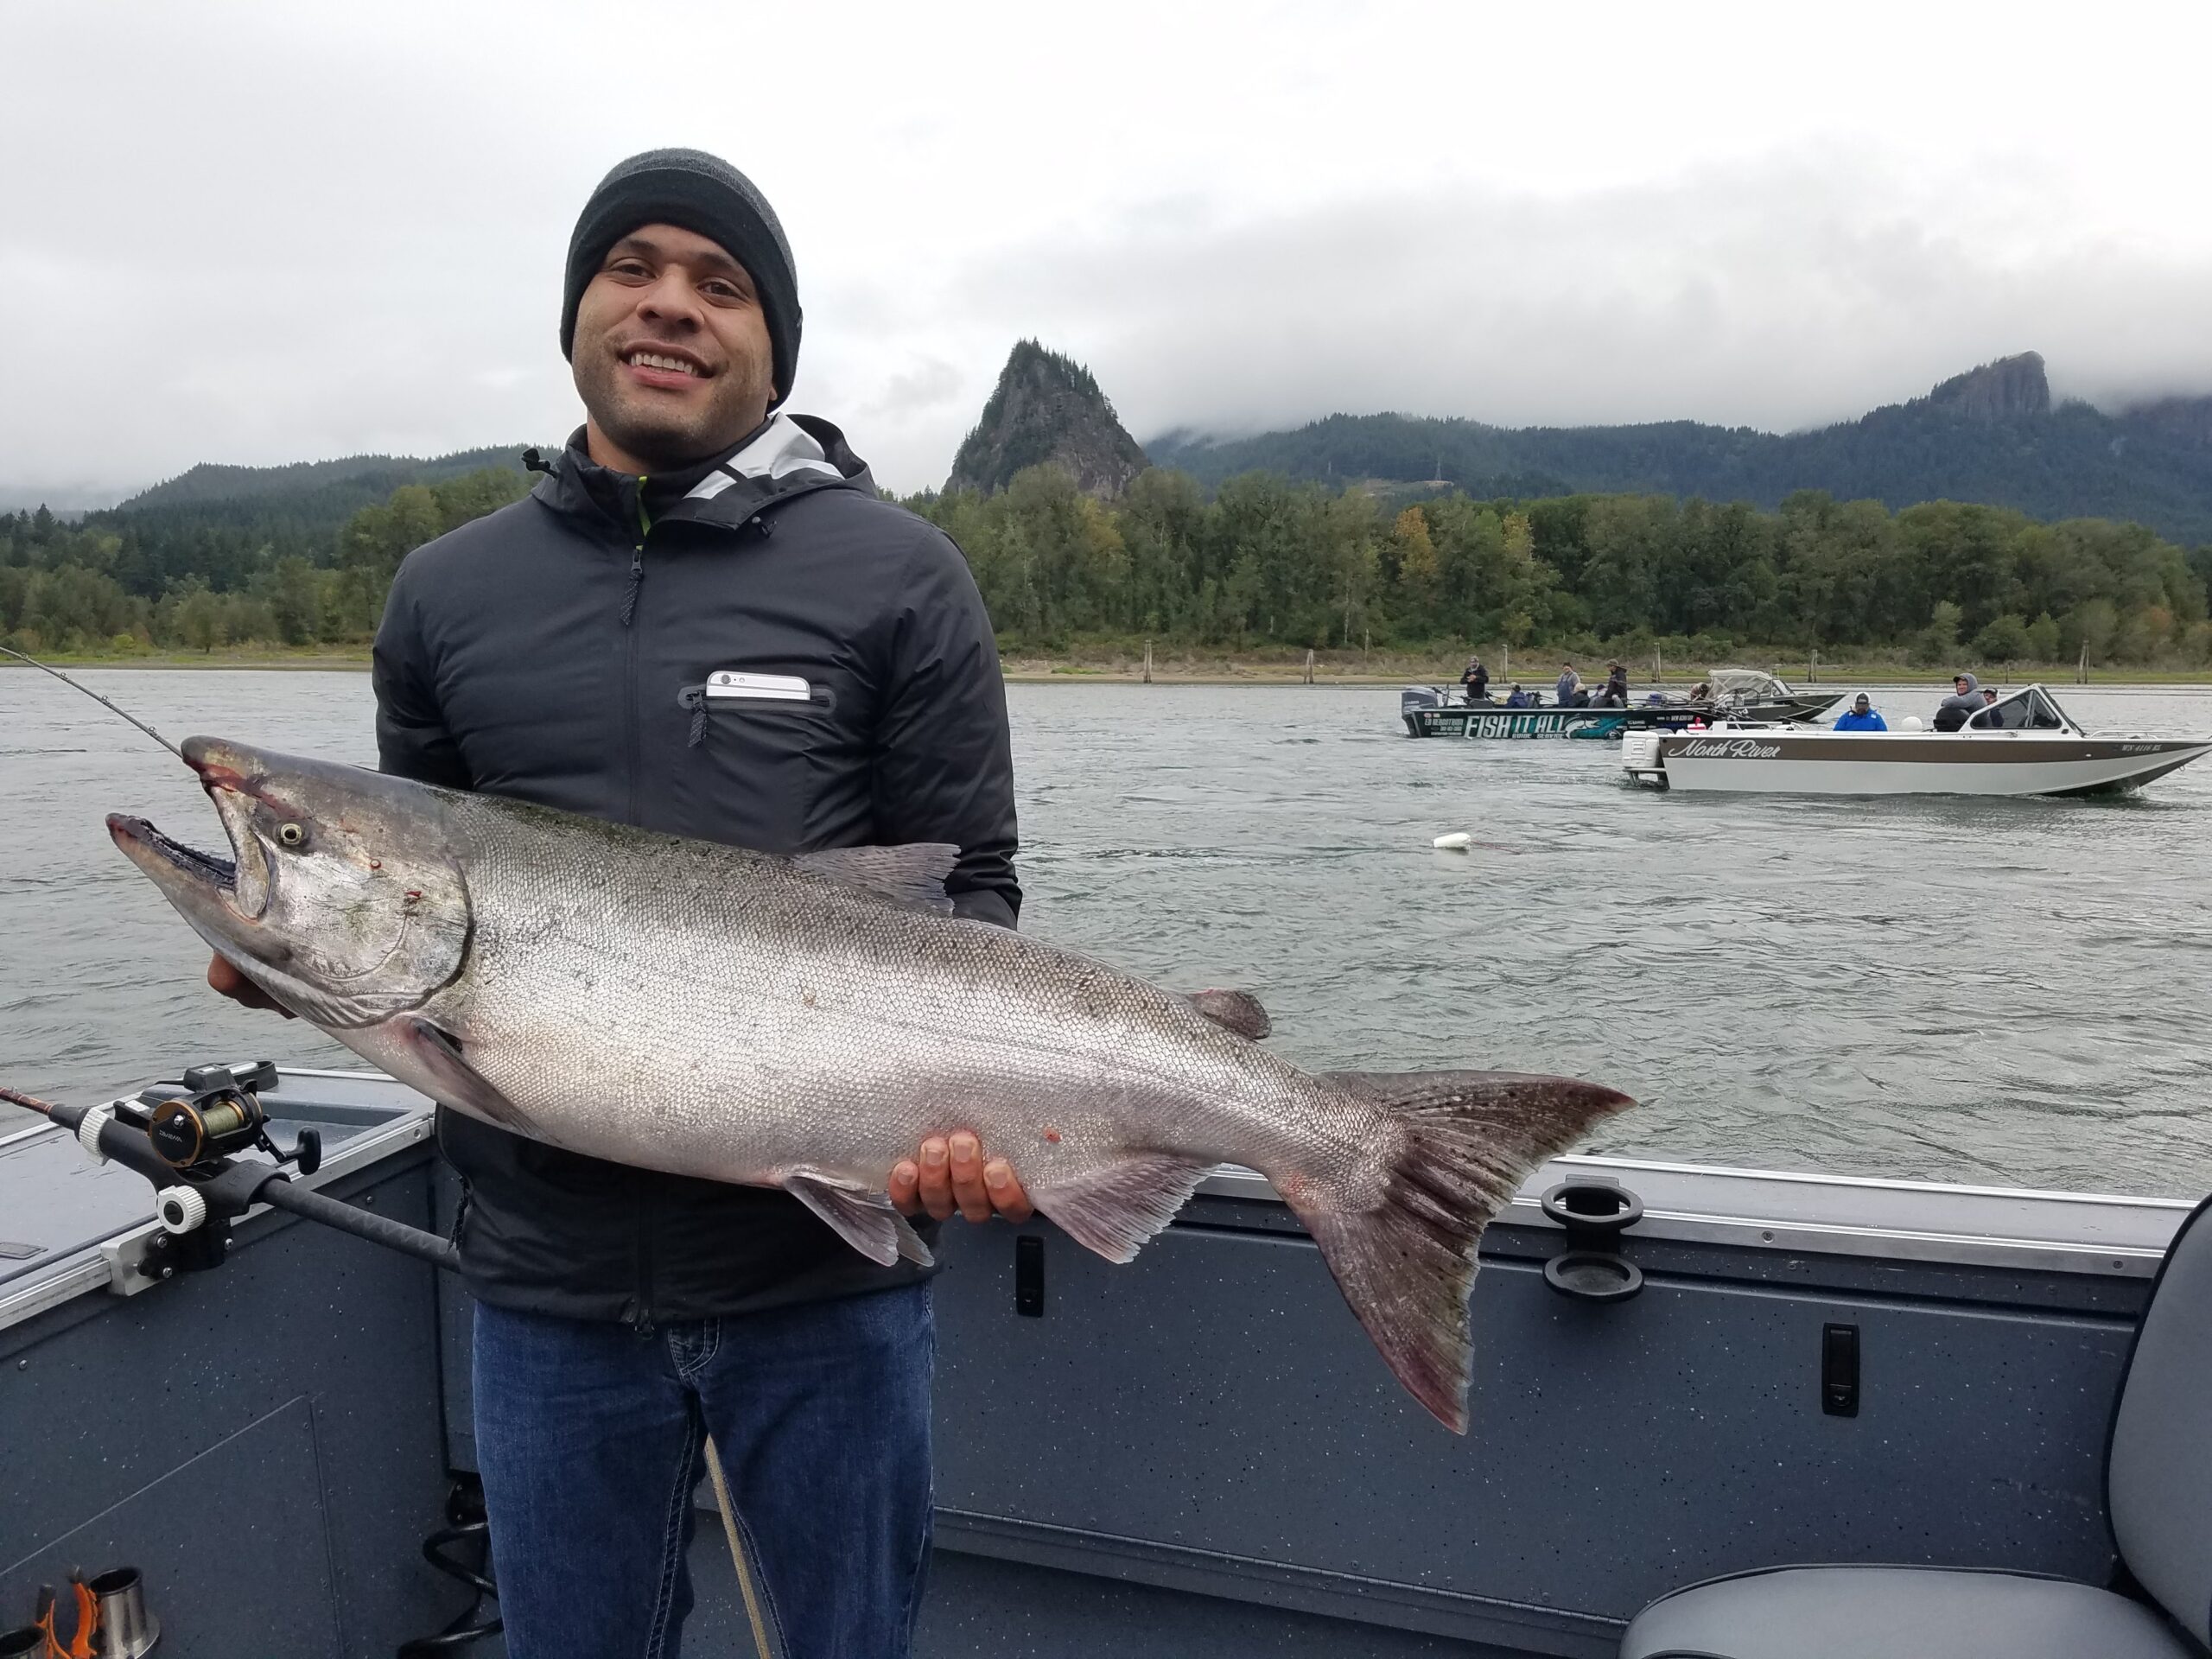 Guy holding large salmon in boat with Beacon Rock in background